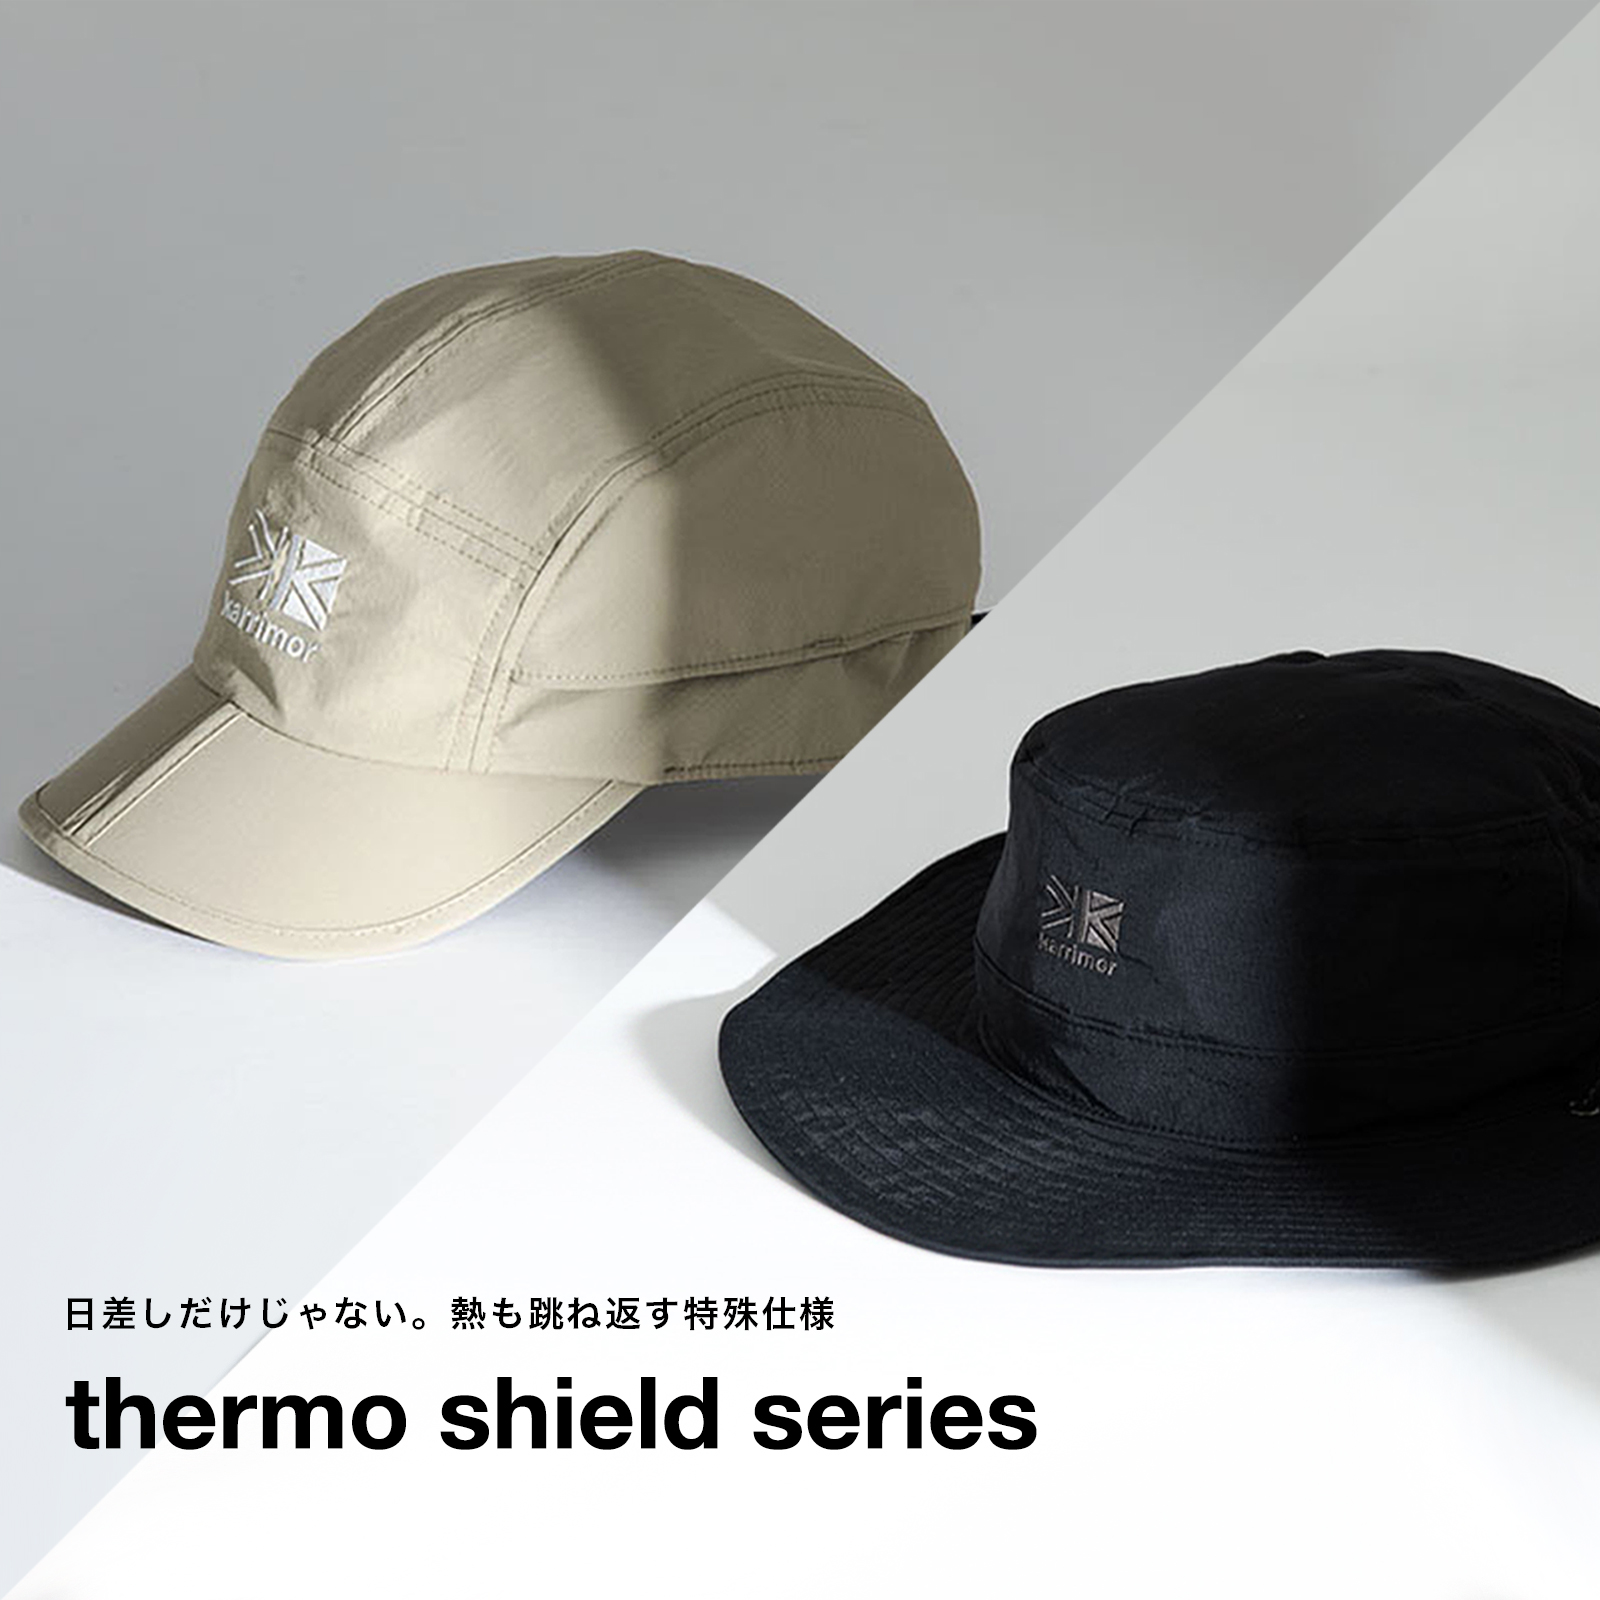 thermo shield by karrimor